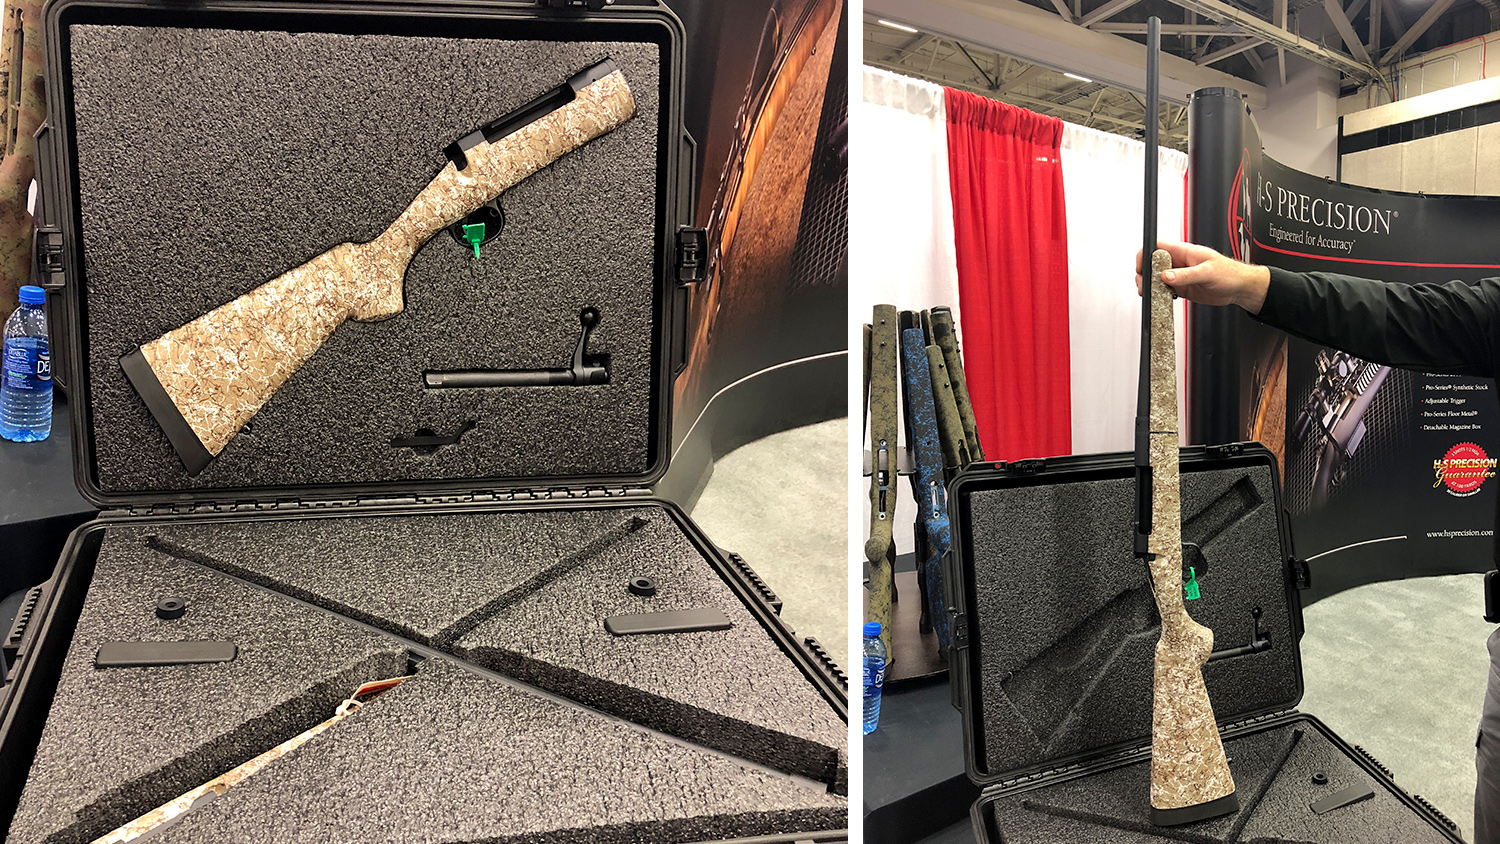 H-S Precision Take-Down at 2018 NRA Annual Meetings